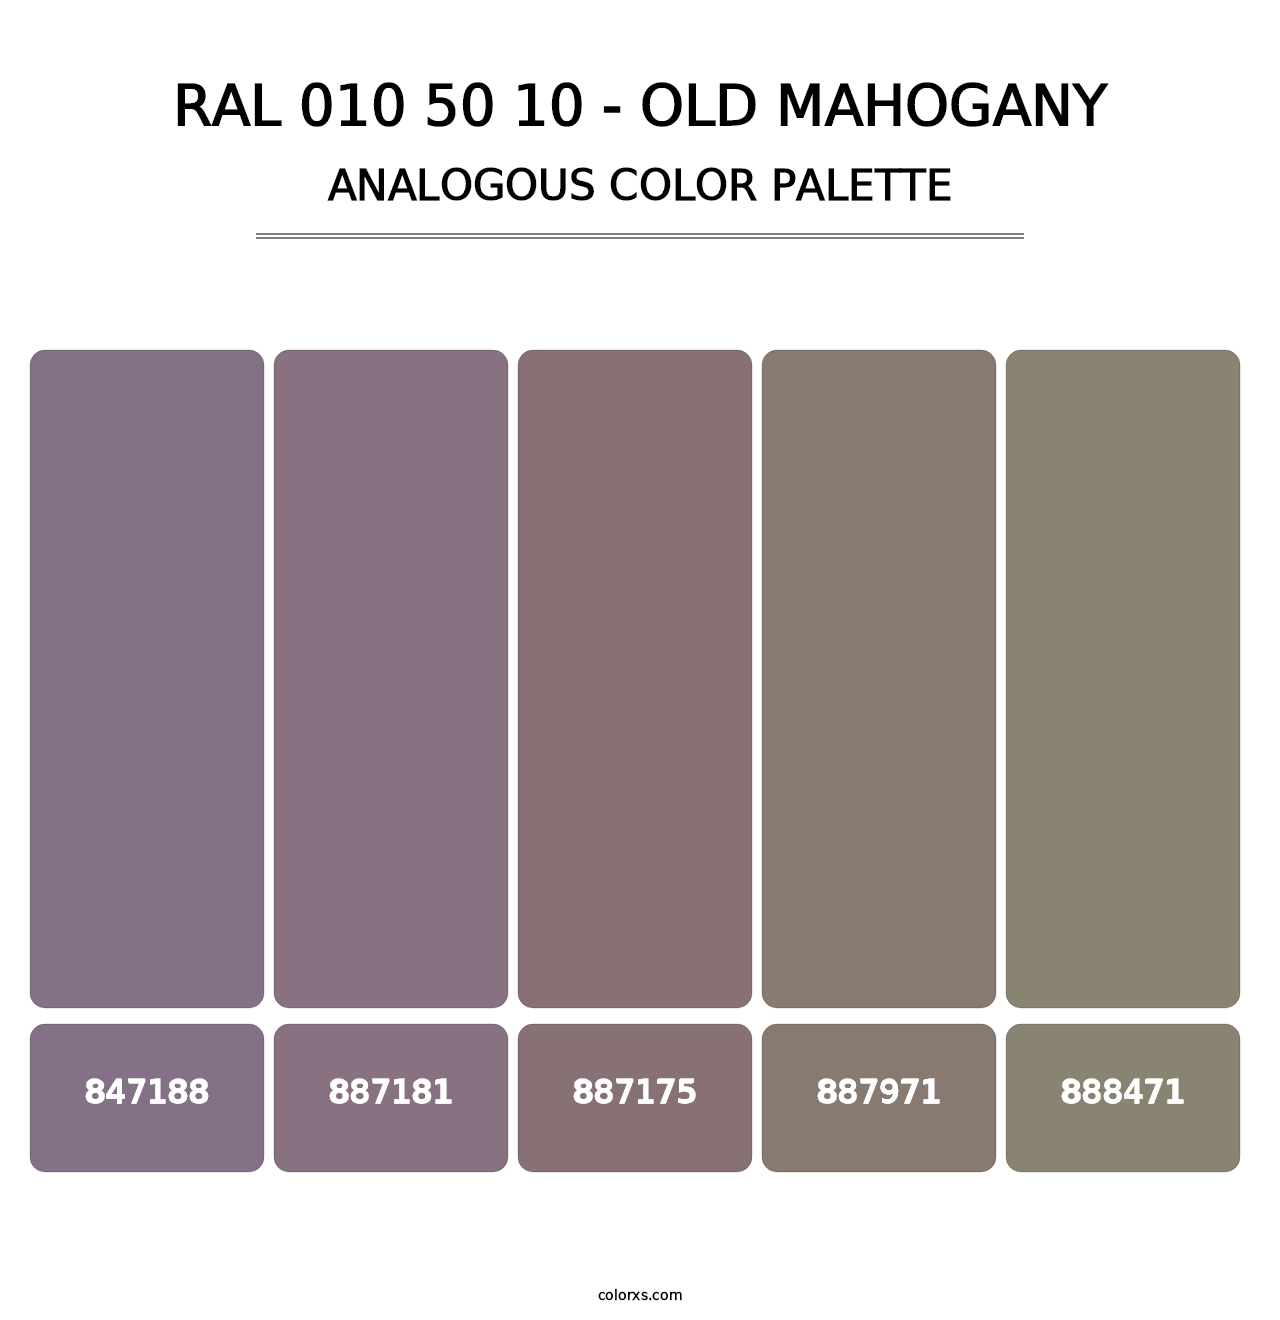 RAL 010 50 10 - Old Mahogany - Analogous Color Palette